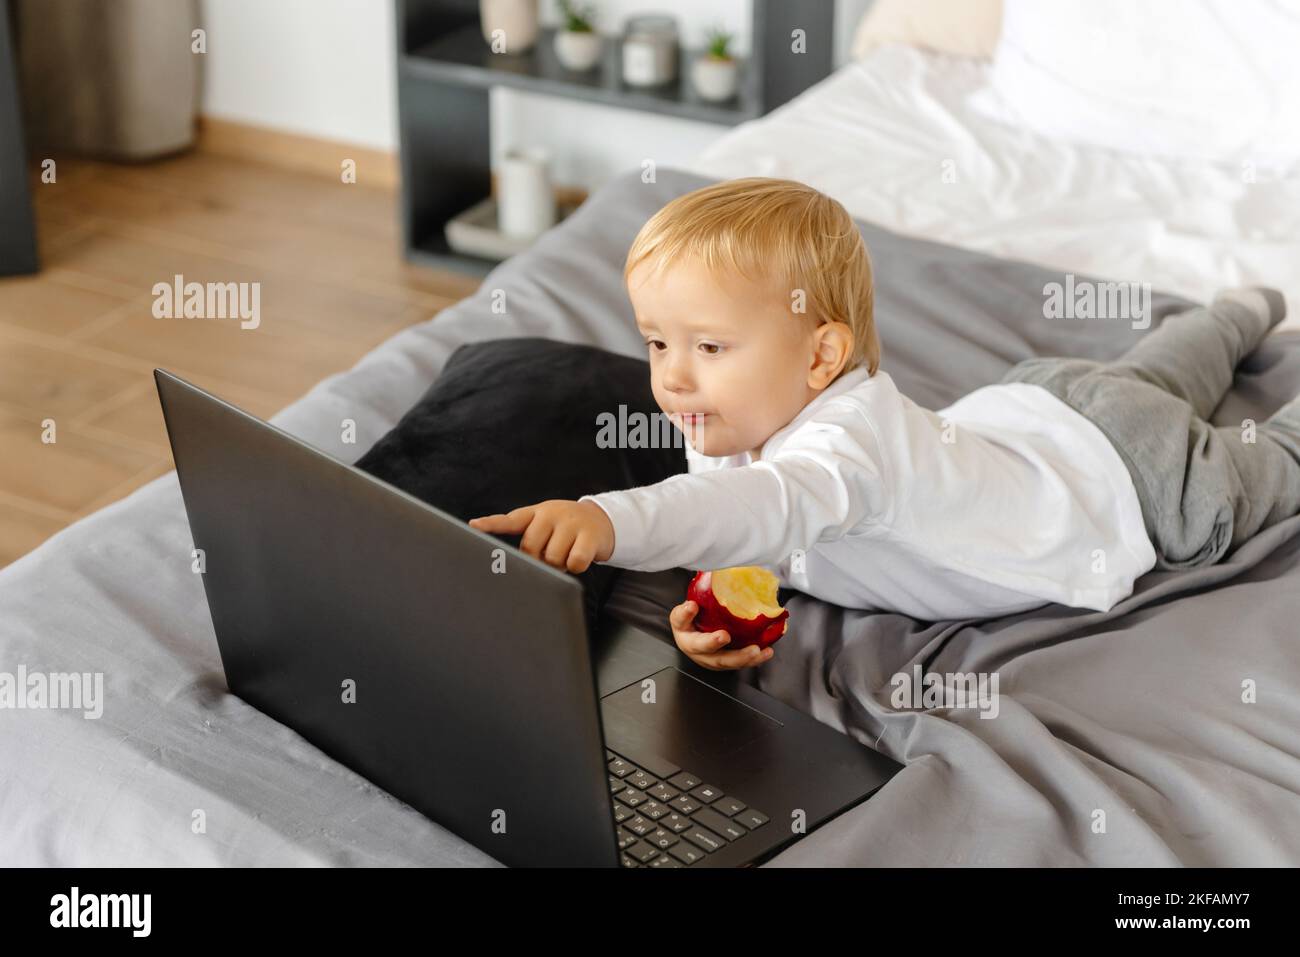 Cute kid is looking at a laptop and holding an apple, the rebonk is playing with the laptop Stock Photo